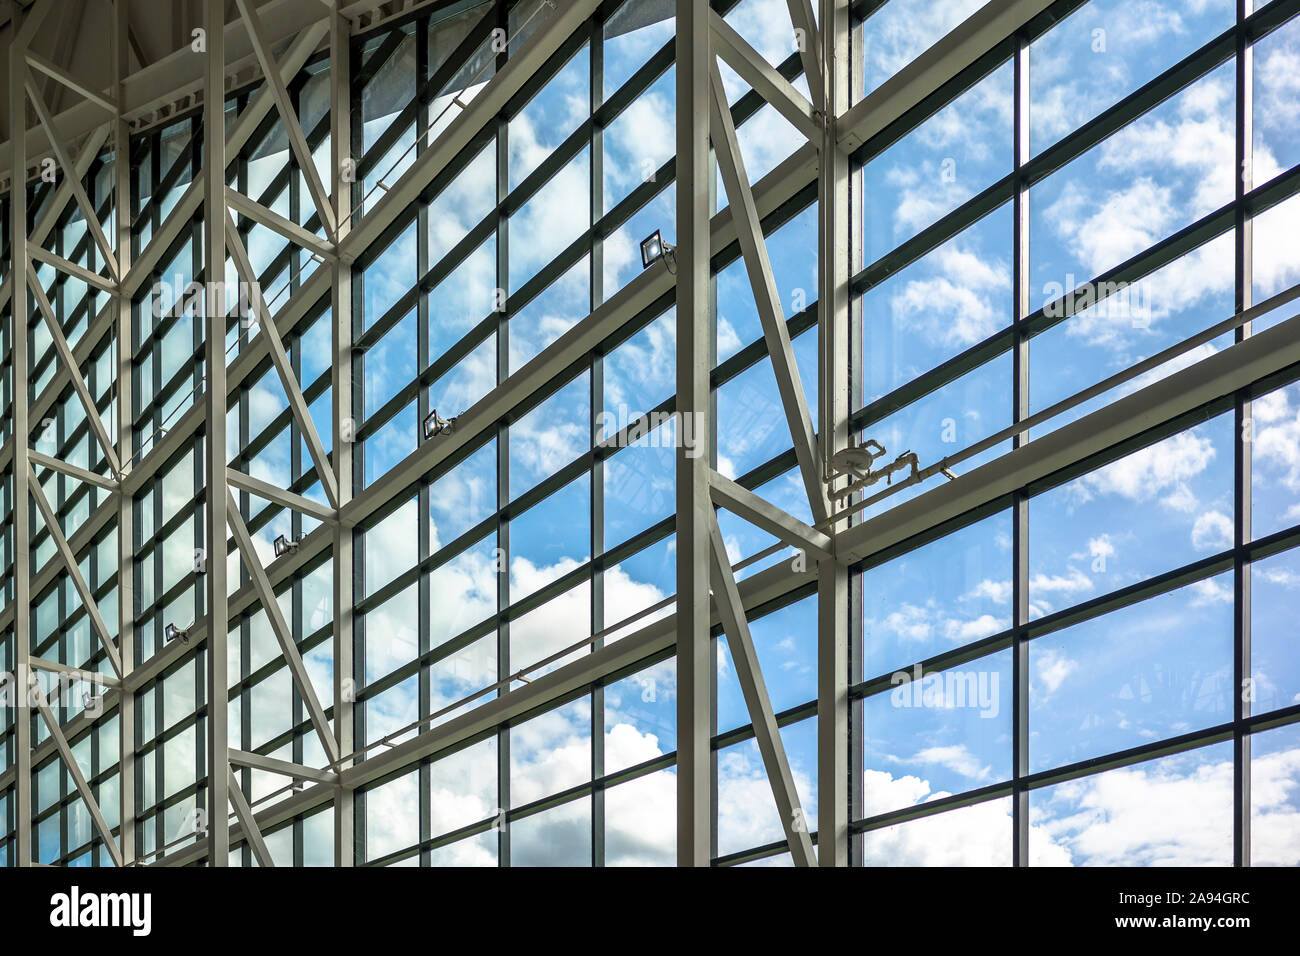 The glass wall with a metal frame supporting the structure for glass blocks  allows a large amount of light to penetrate into the room, creating the ef  Stock Photo - Alamy